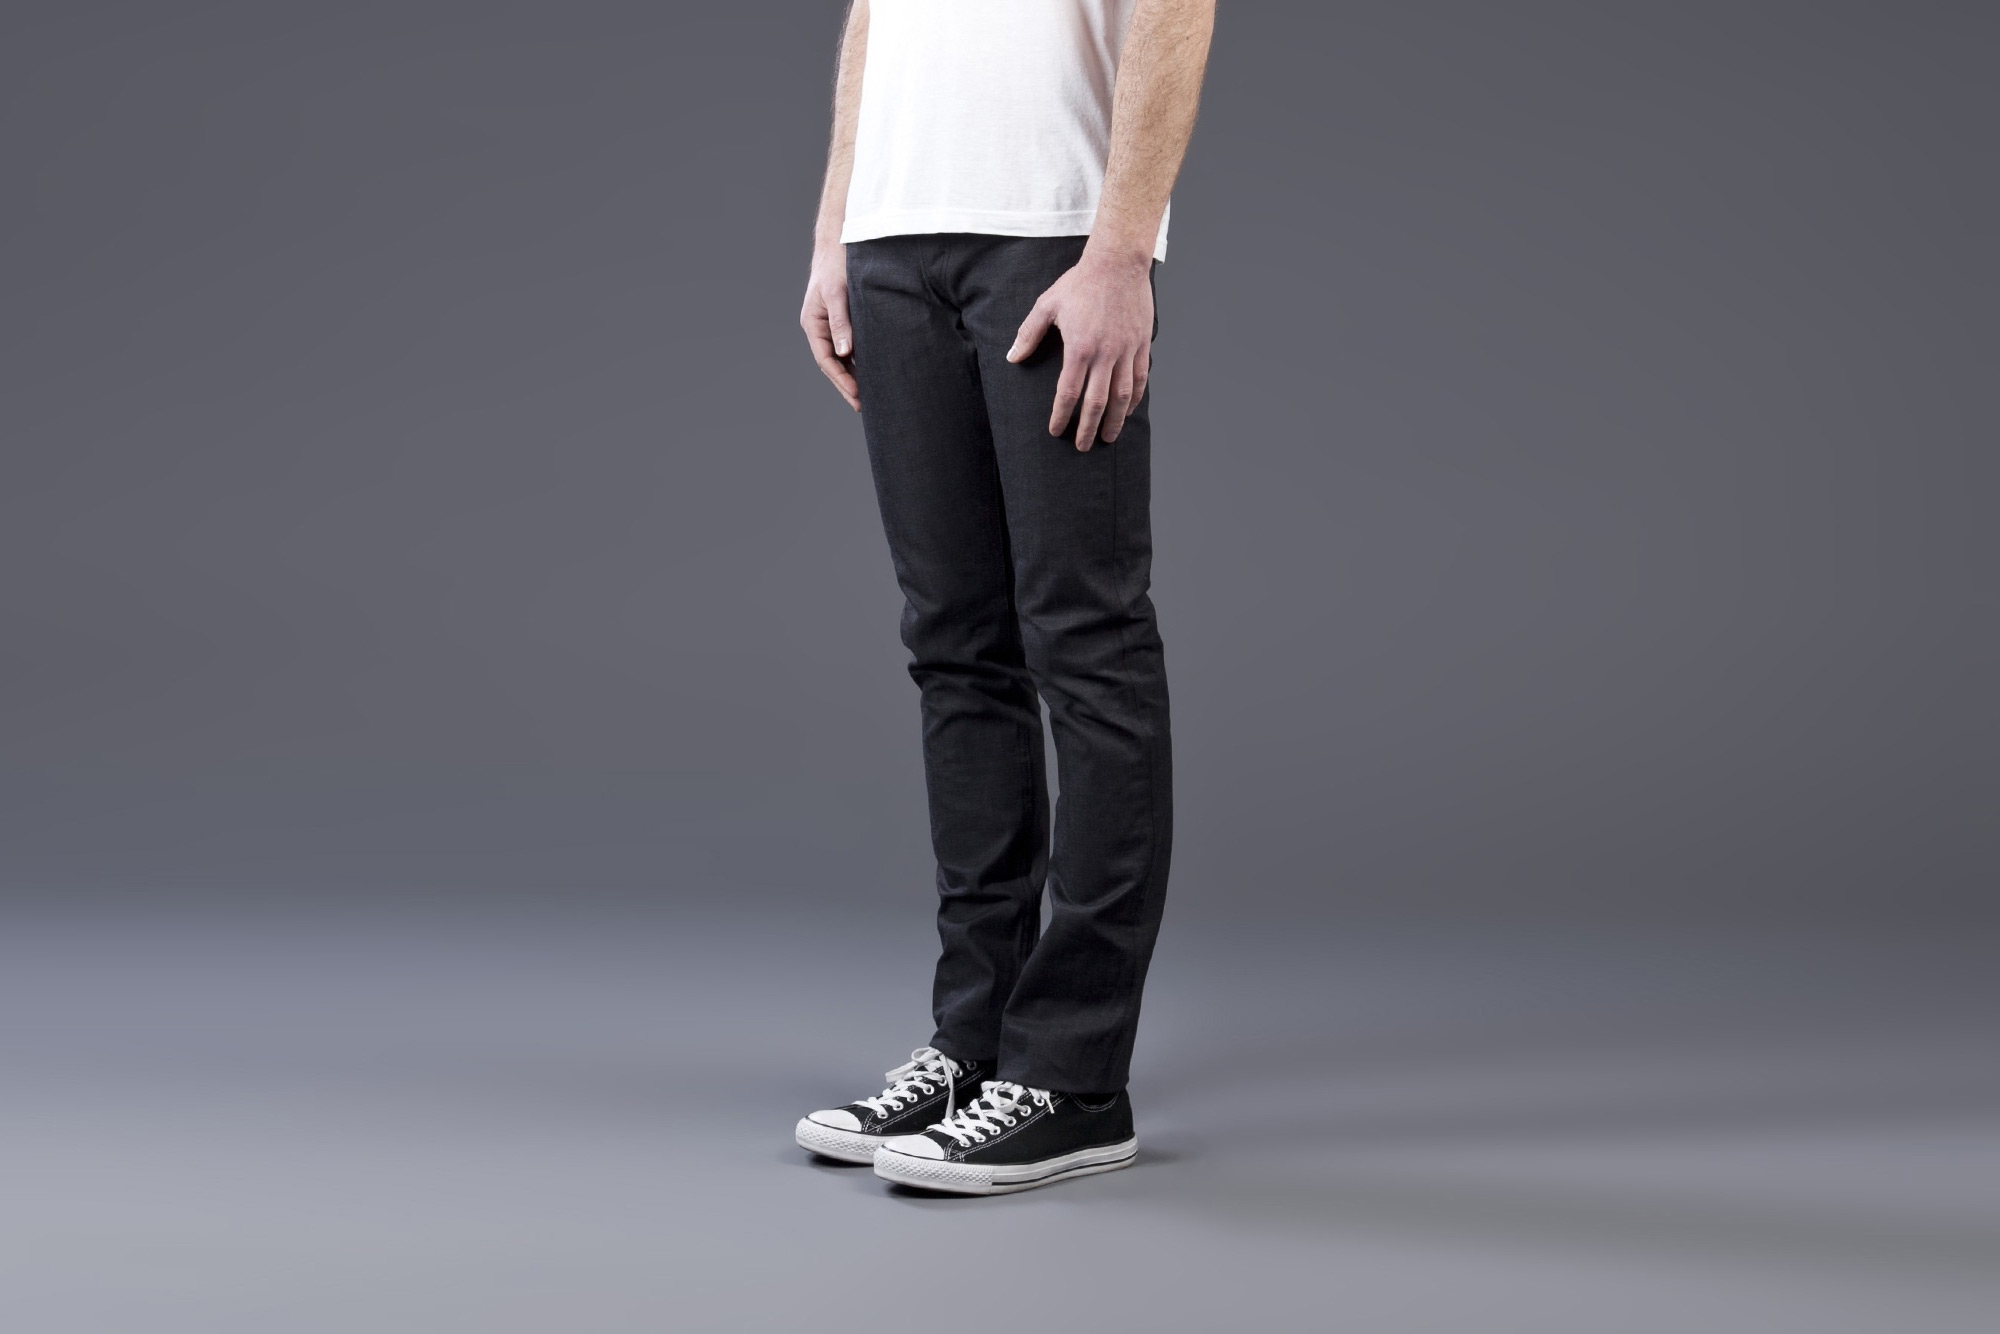 Mens Jeans  Buy Jeans Pants for Men in India at Best Prices  Wrangler